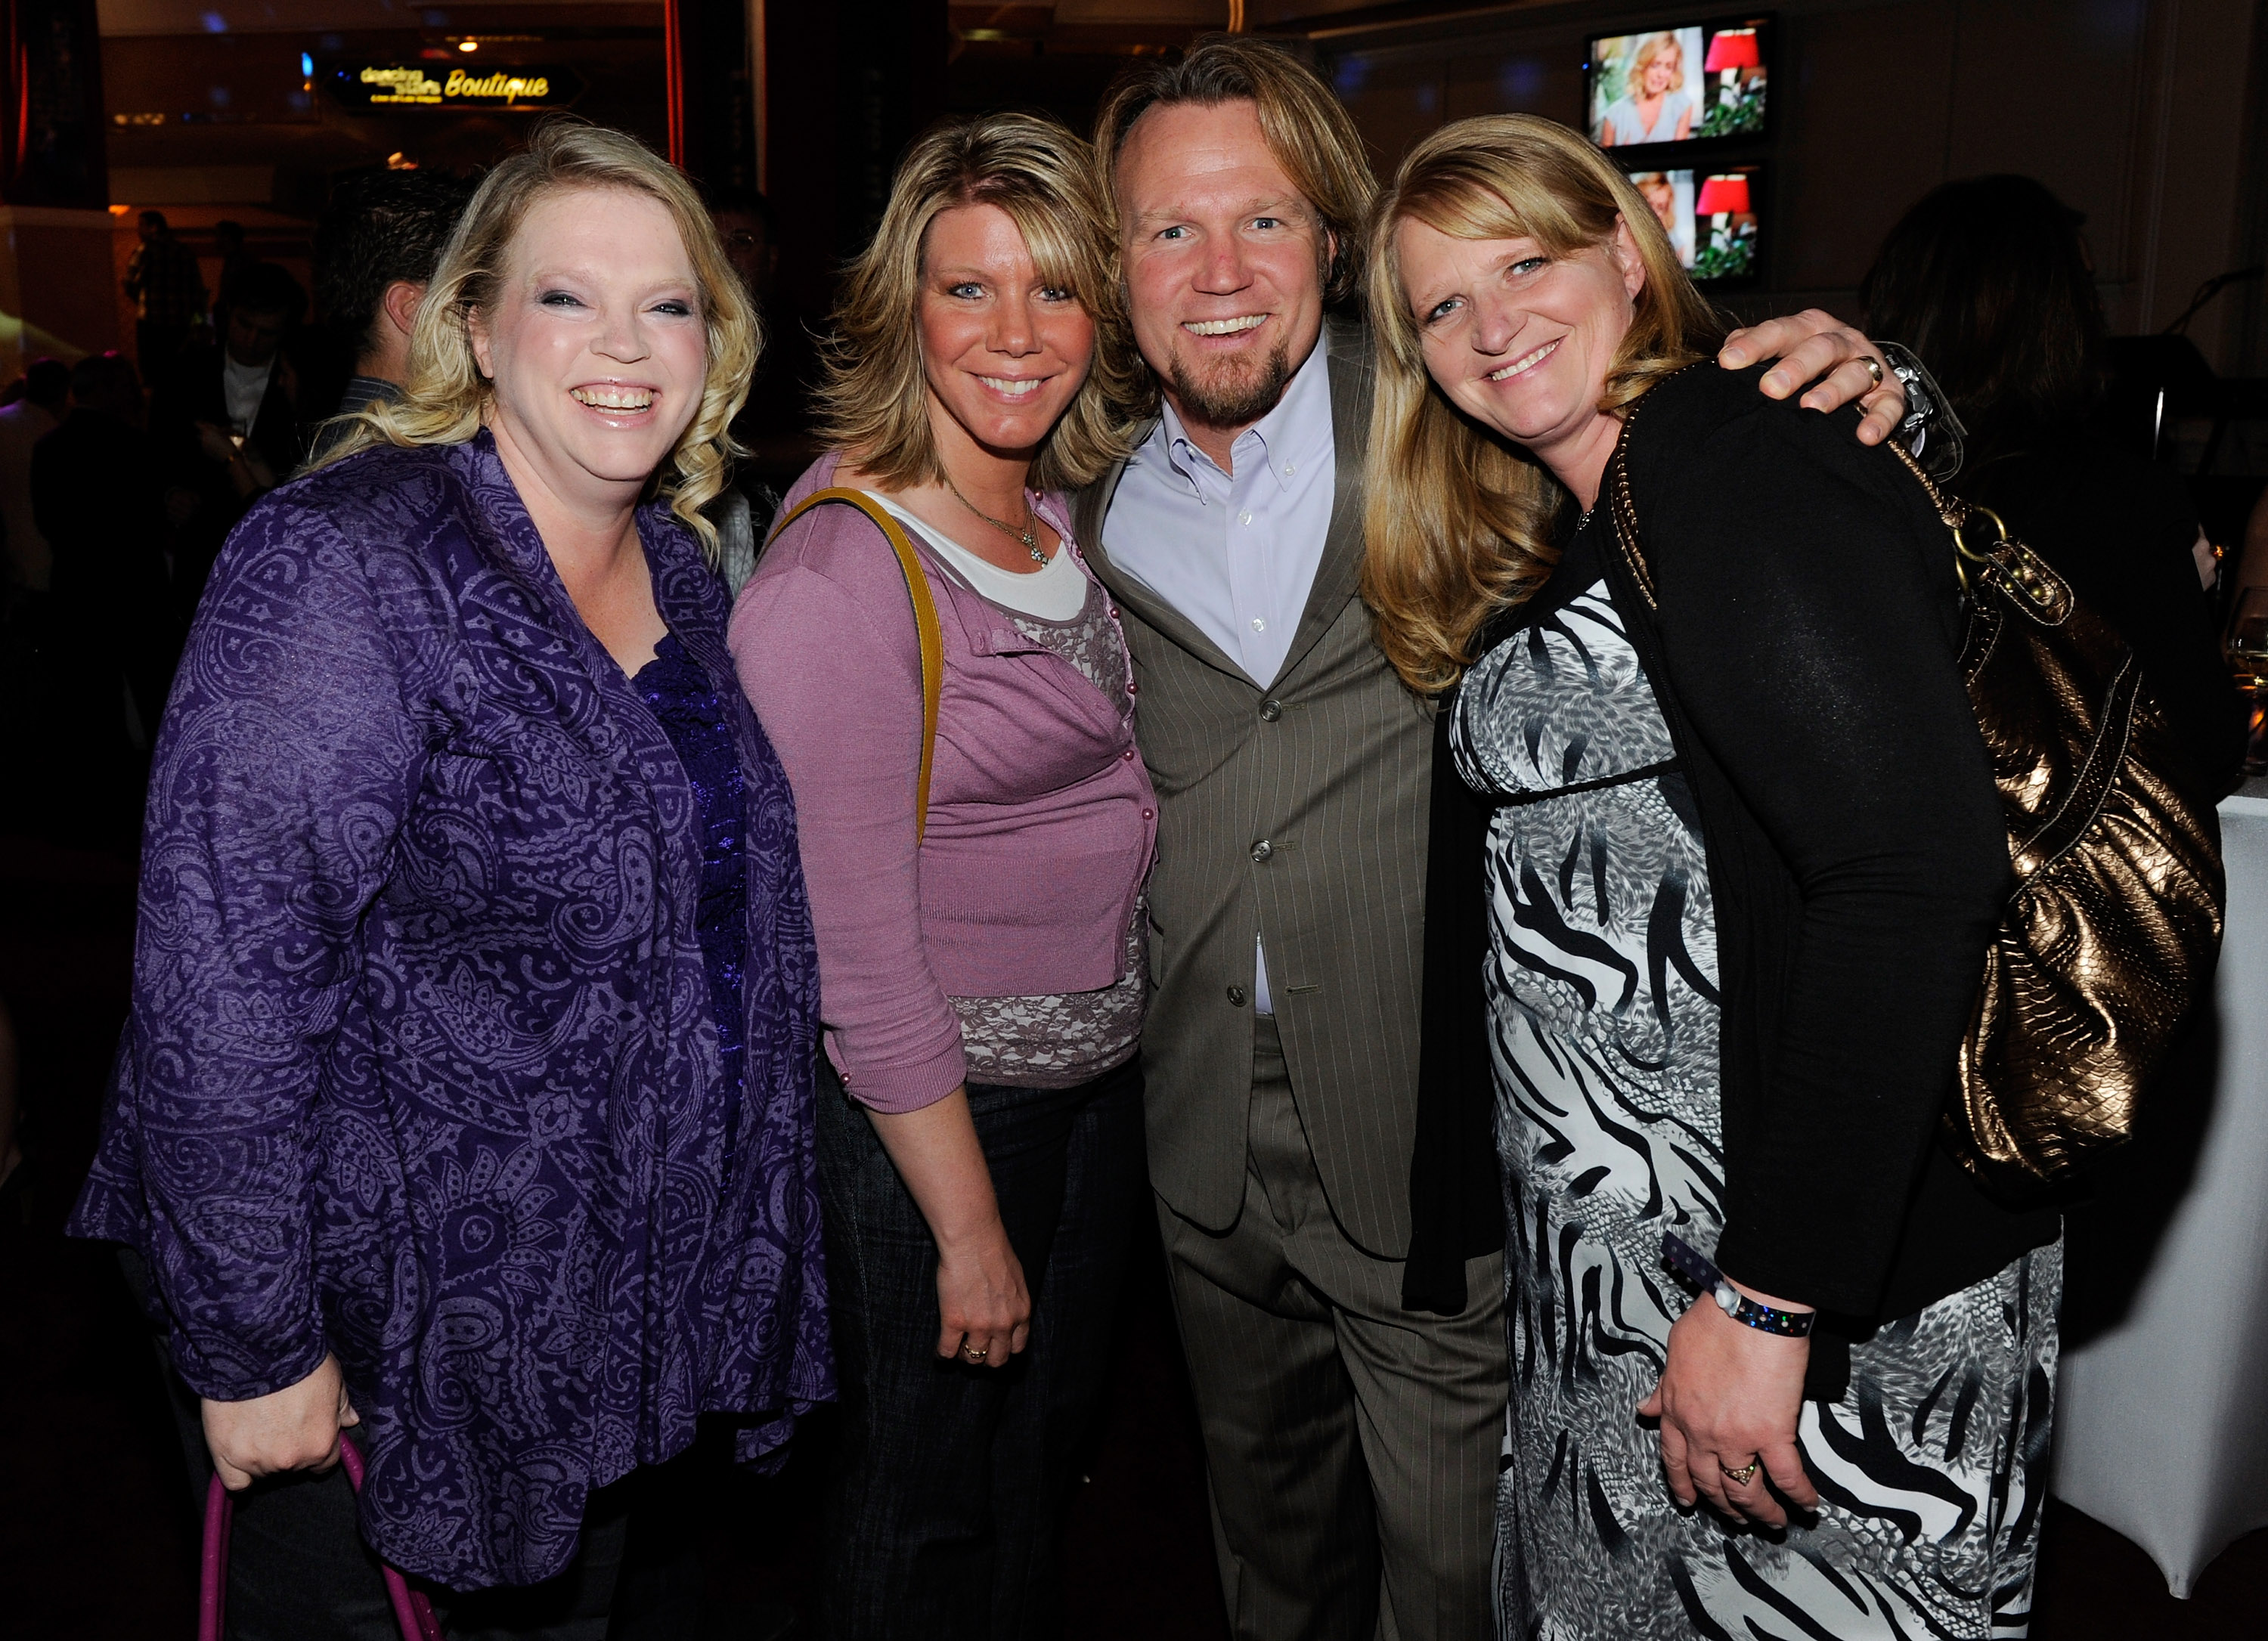 Janelle, Meri, Kody, and Christine Brown attend a pre-show reception for the grand opening of "Dancing With the Stars: Live in Las Vegas" on April 13, 2012 in Las Vegas, Nevada | Source: Getty Images